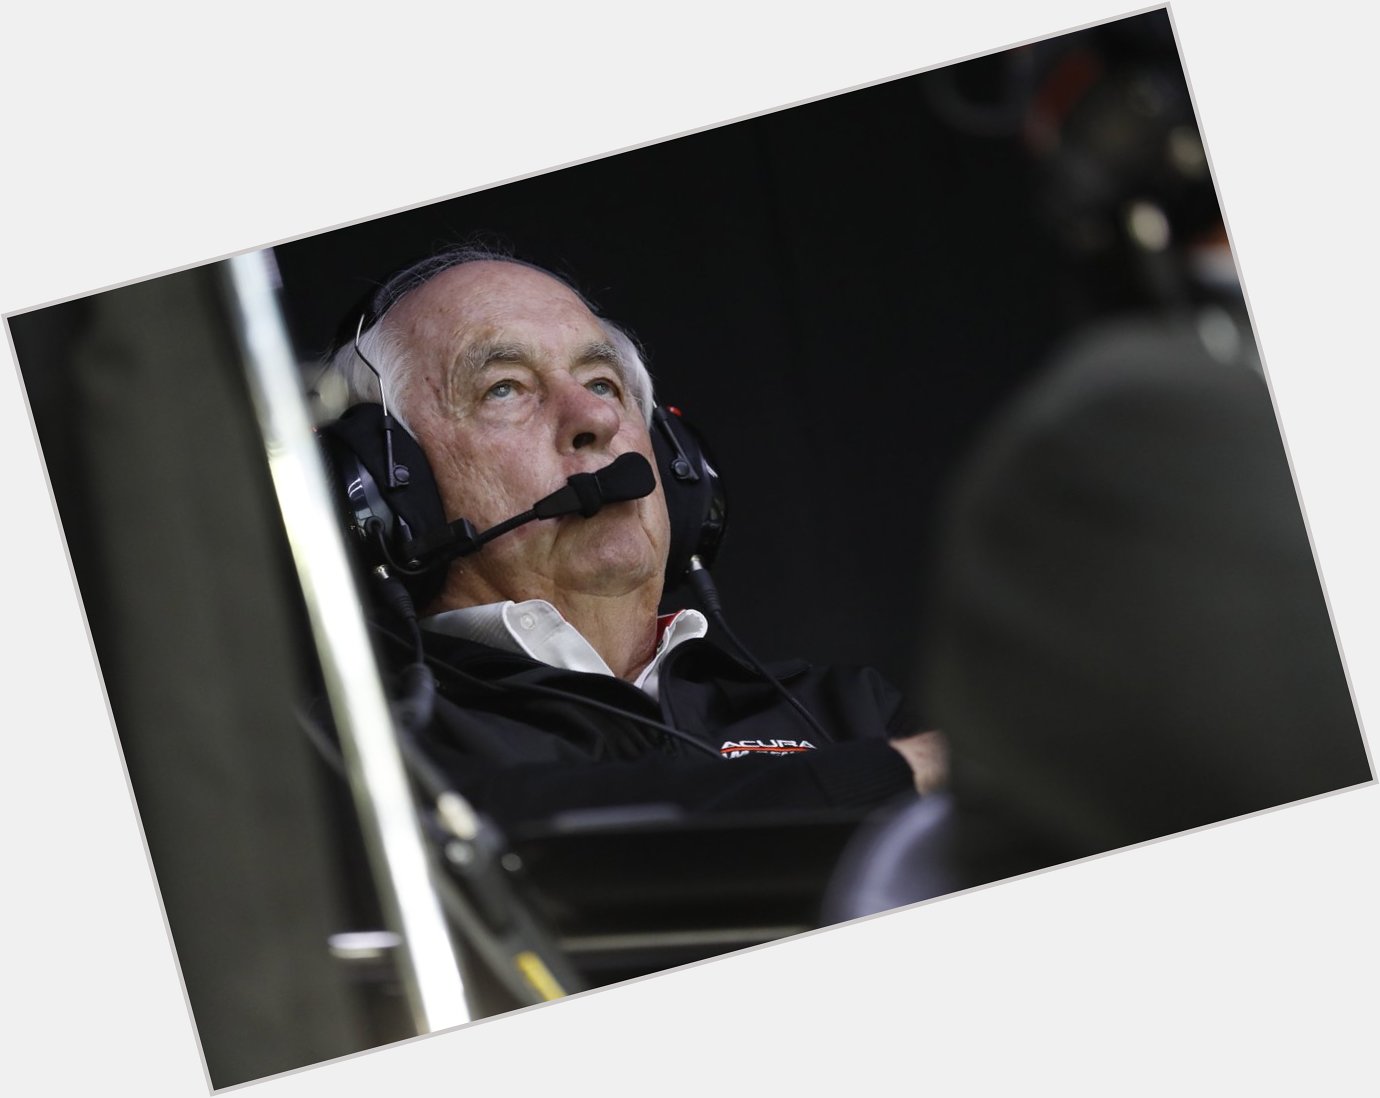 We would like to wish a very happy birthday to Roger Penske! 